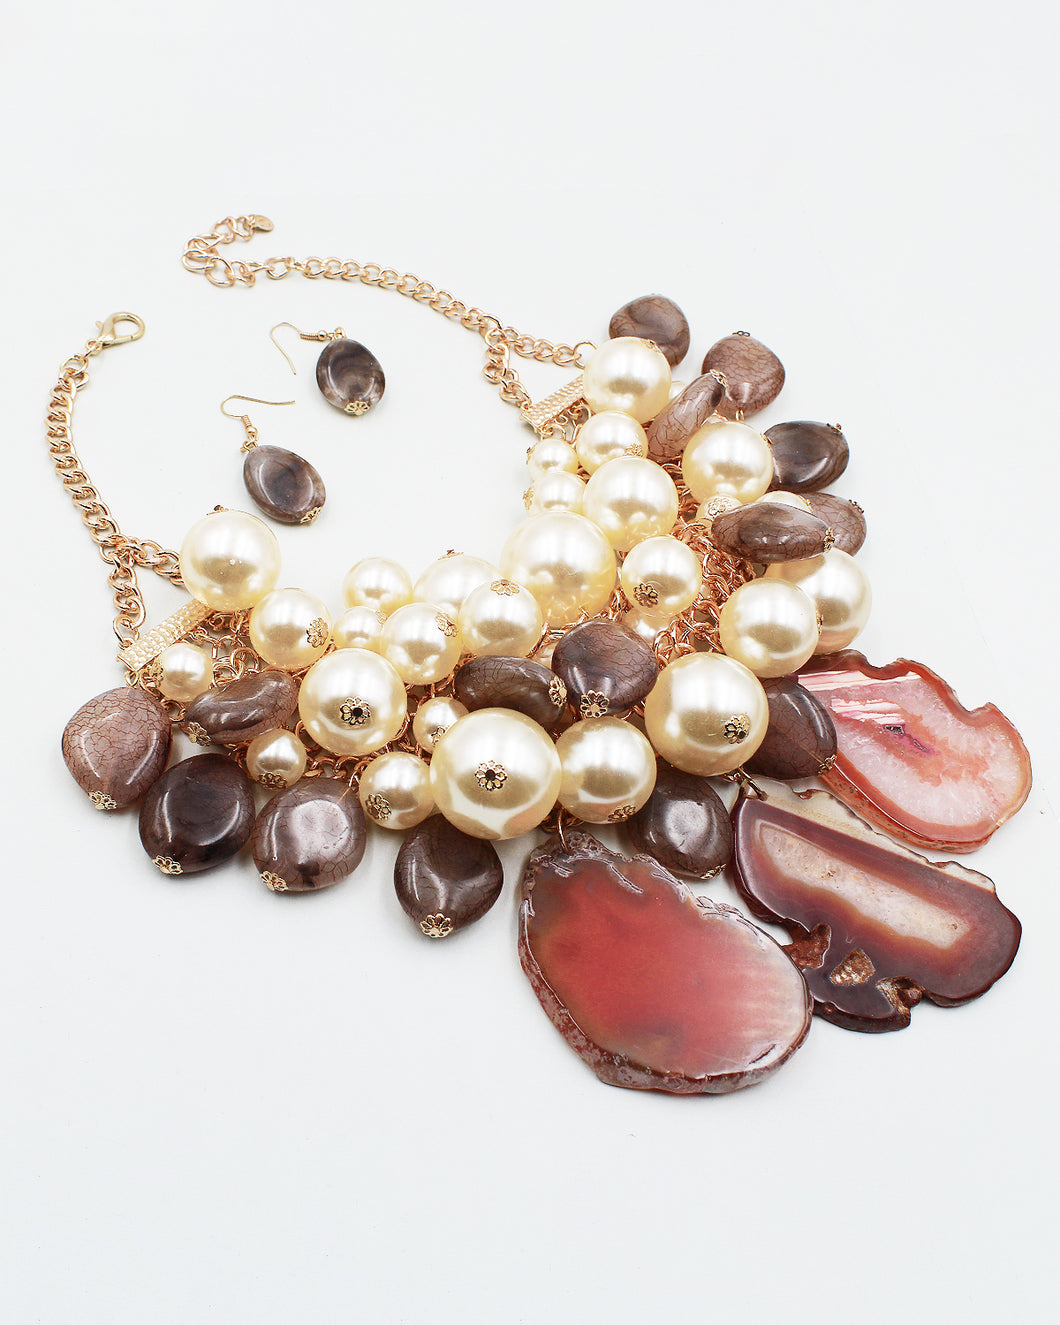 Natural Agate Stone & Pearl Beaded Statement Necklace Set